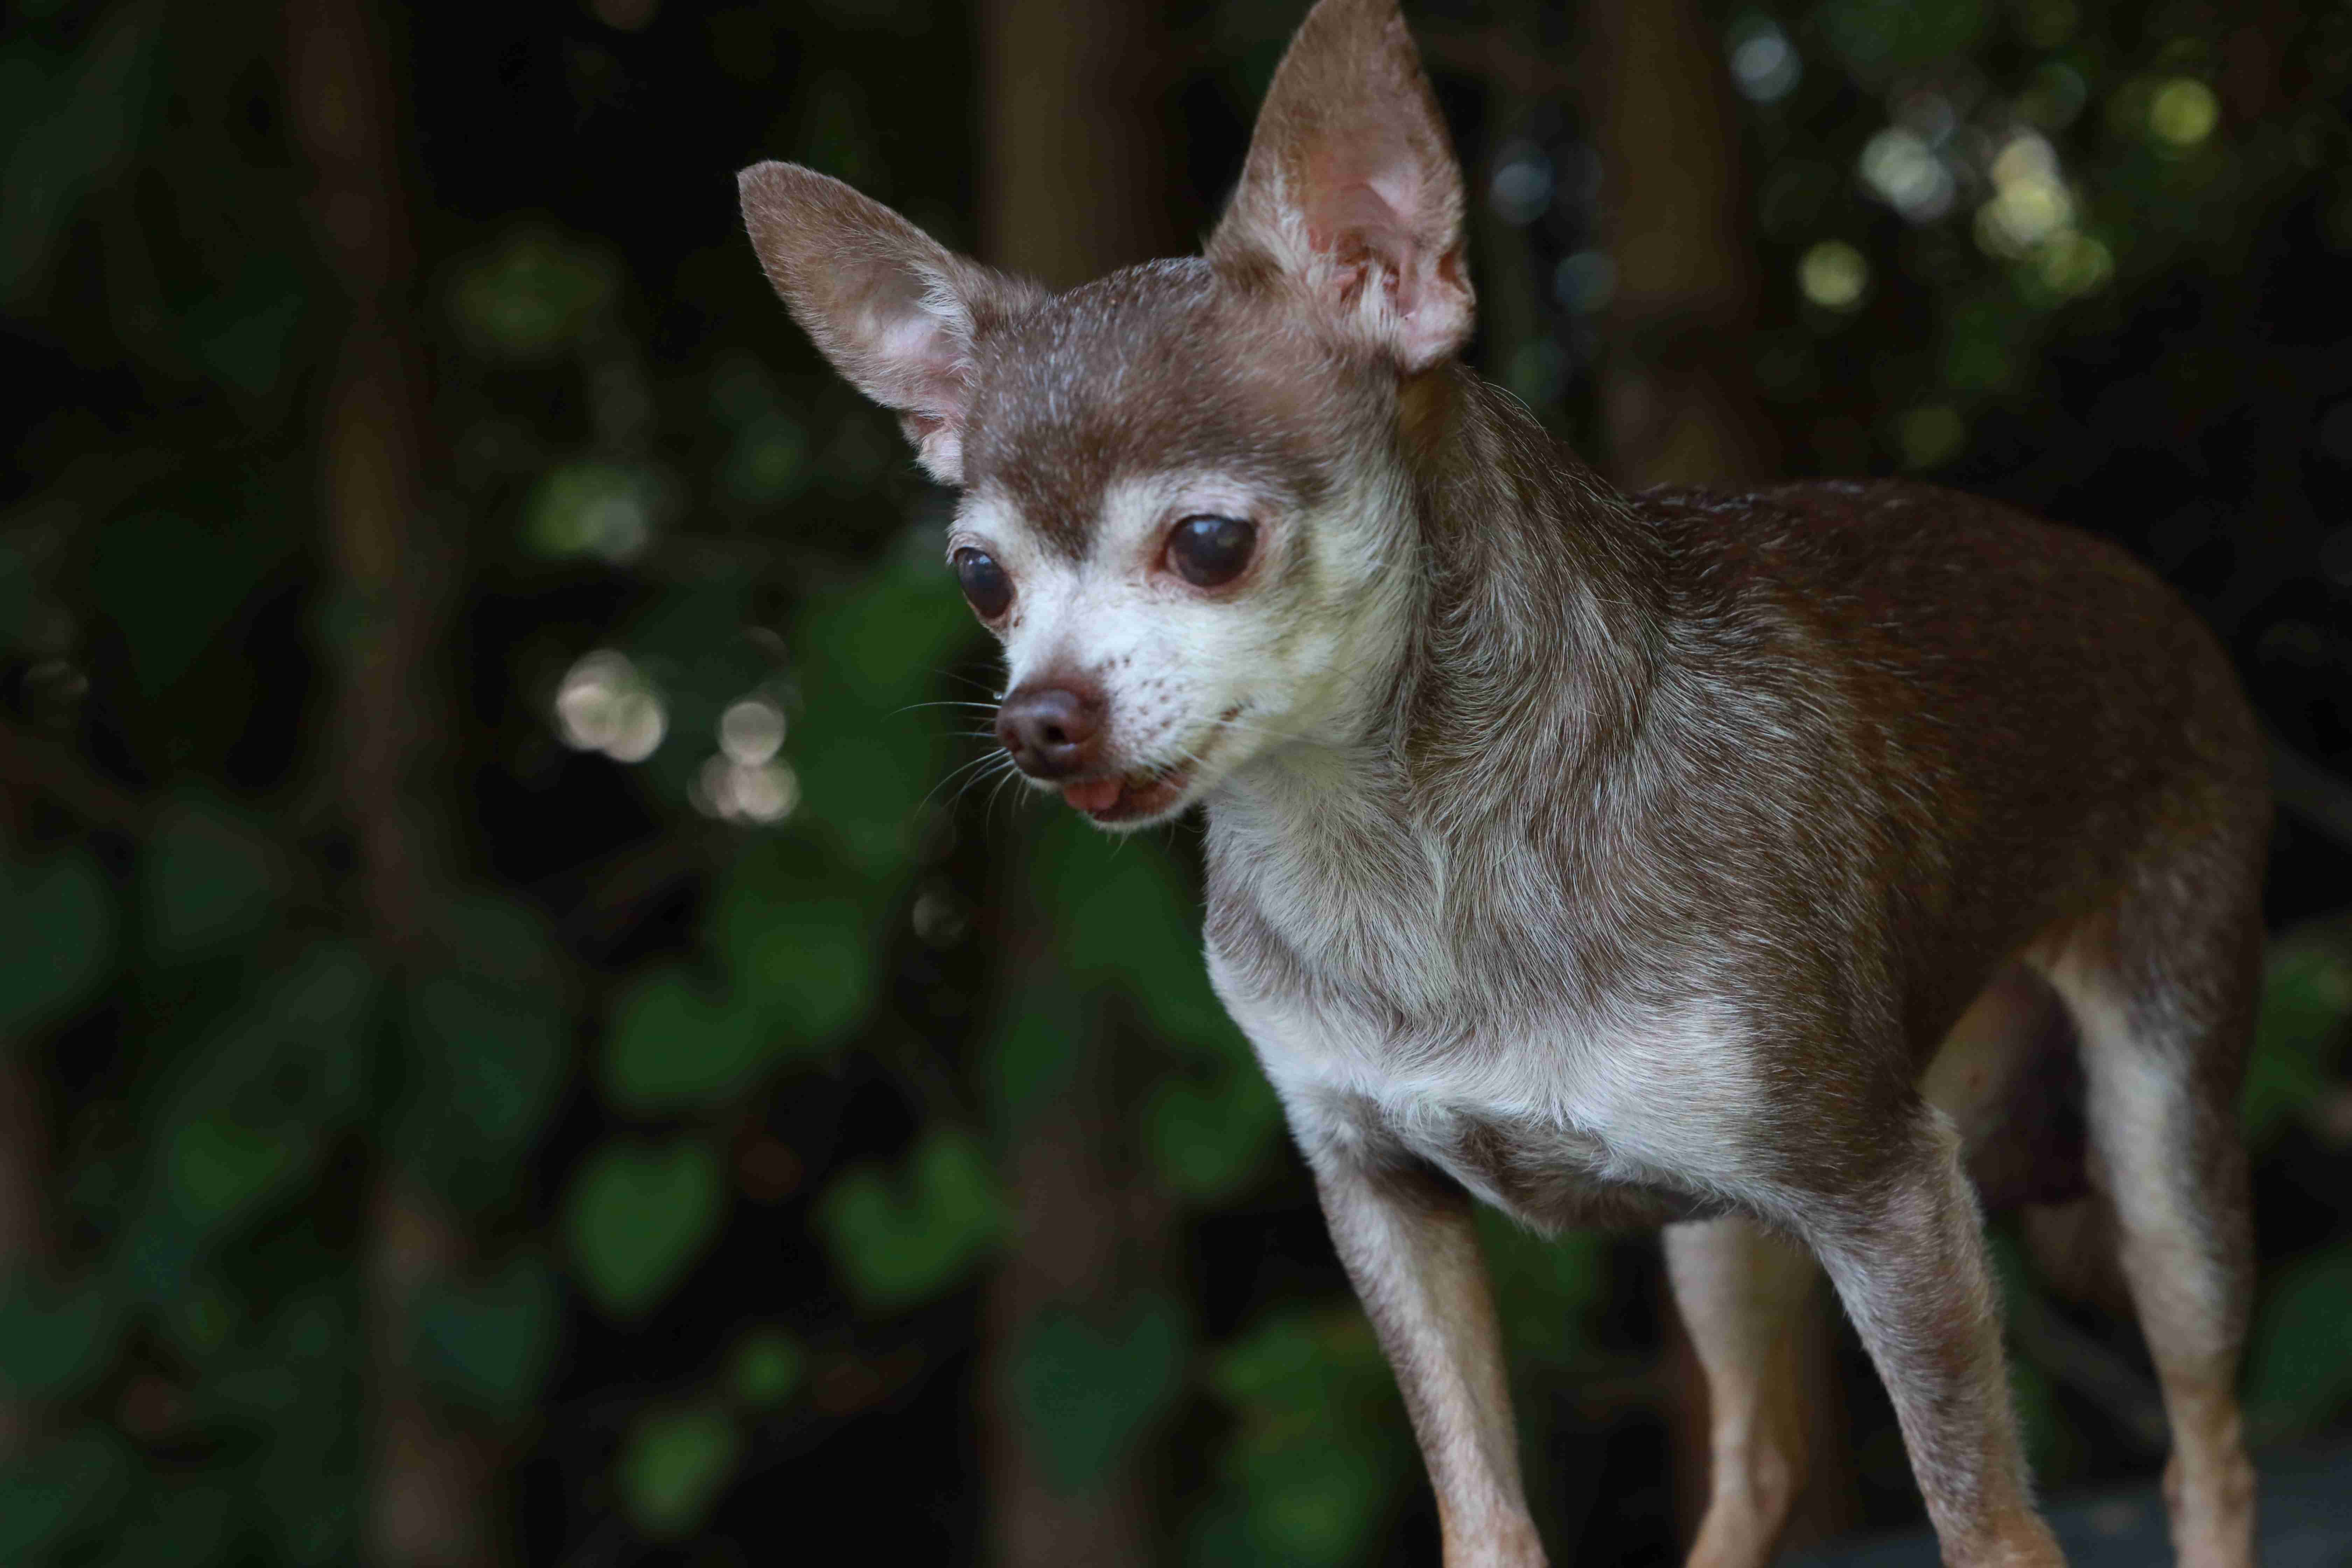 How can you prevent Chihuahua aggression towards other dogs when walking them on a leash?